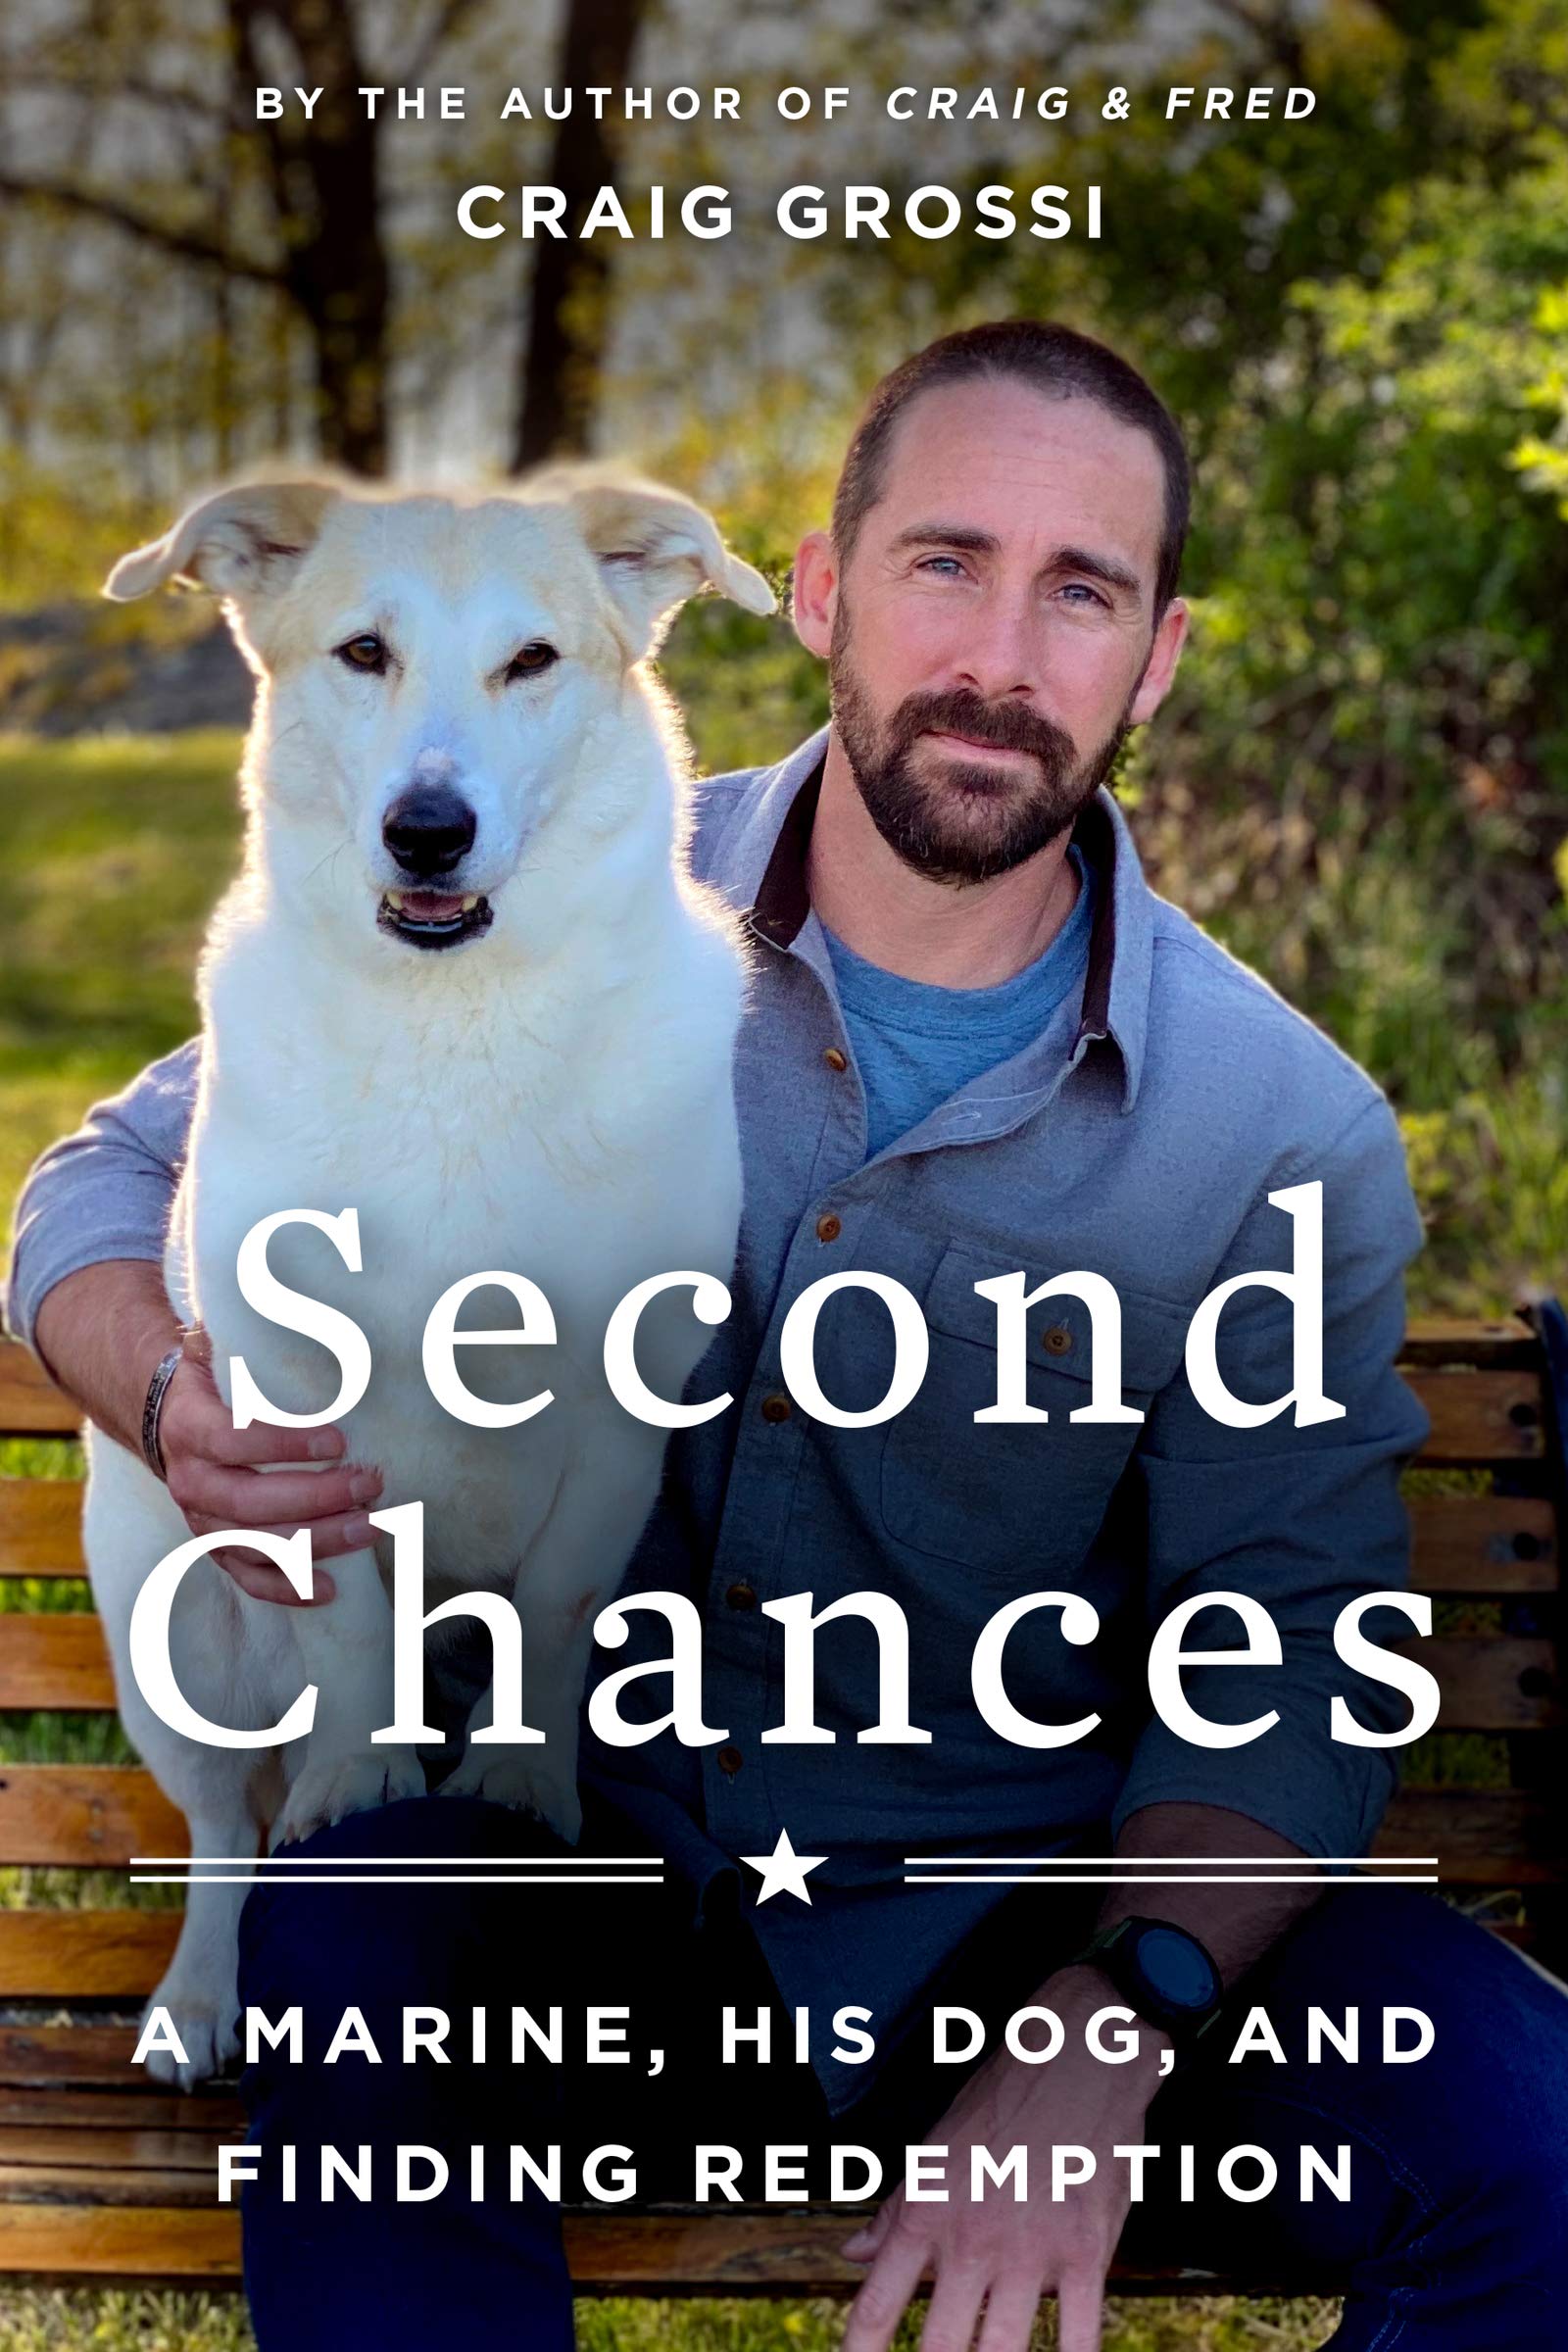 Image for "Second Chances"